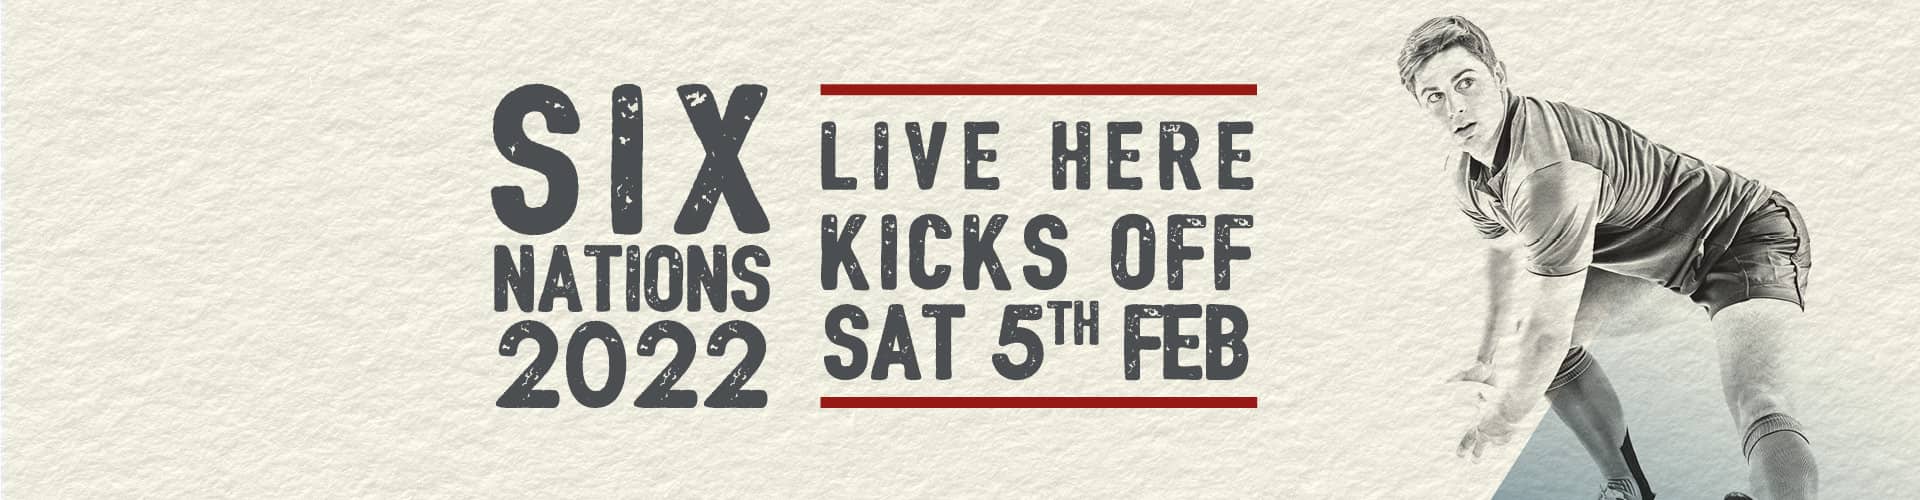 Watch the Six Nations live at The Imperial Inn